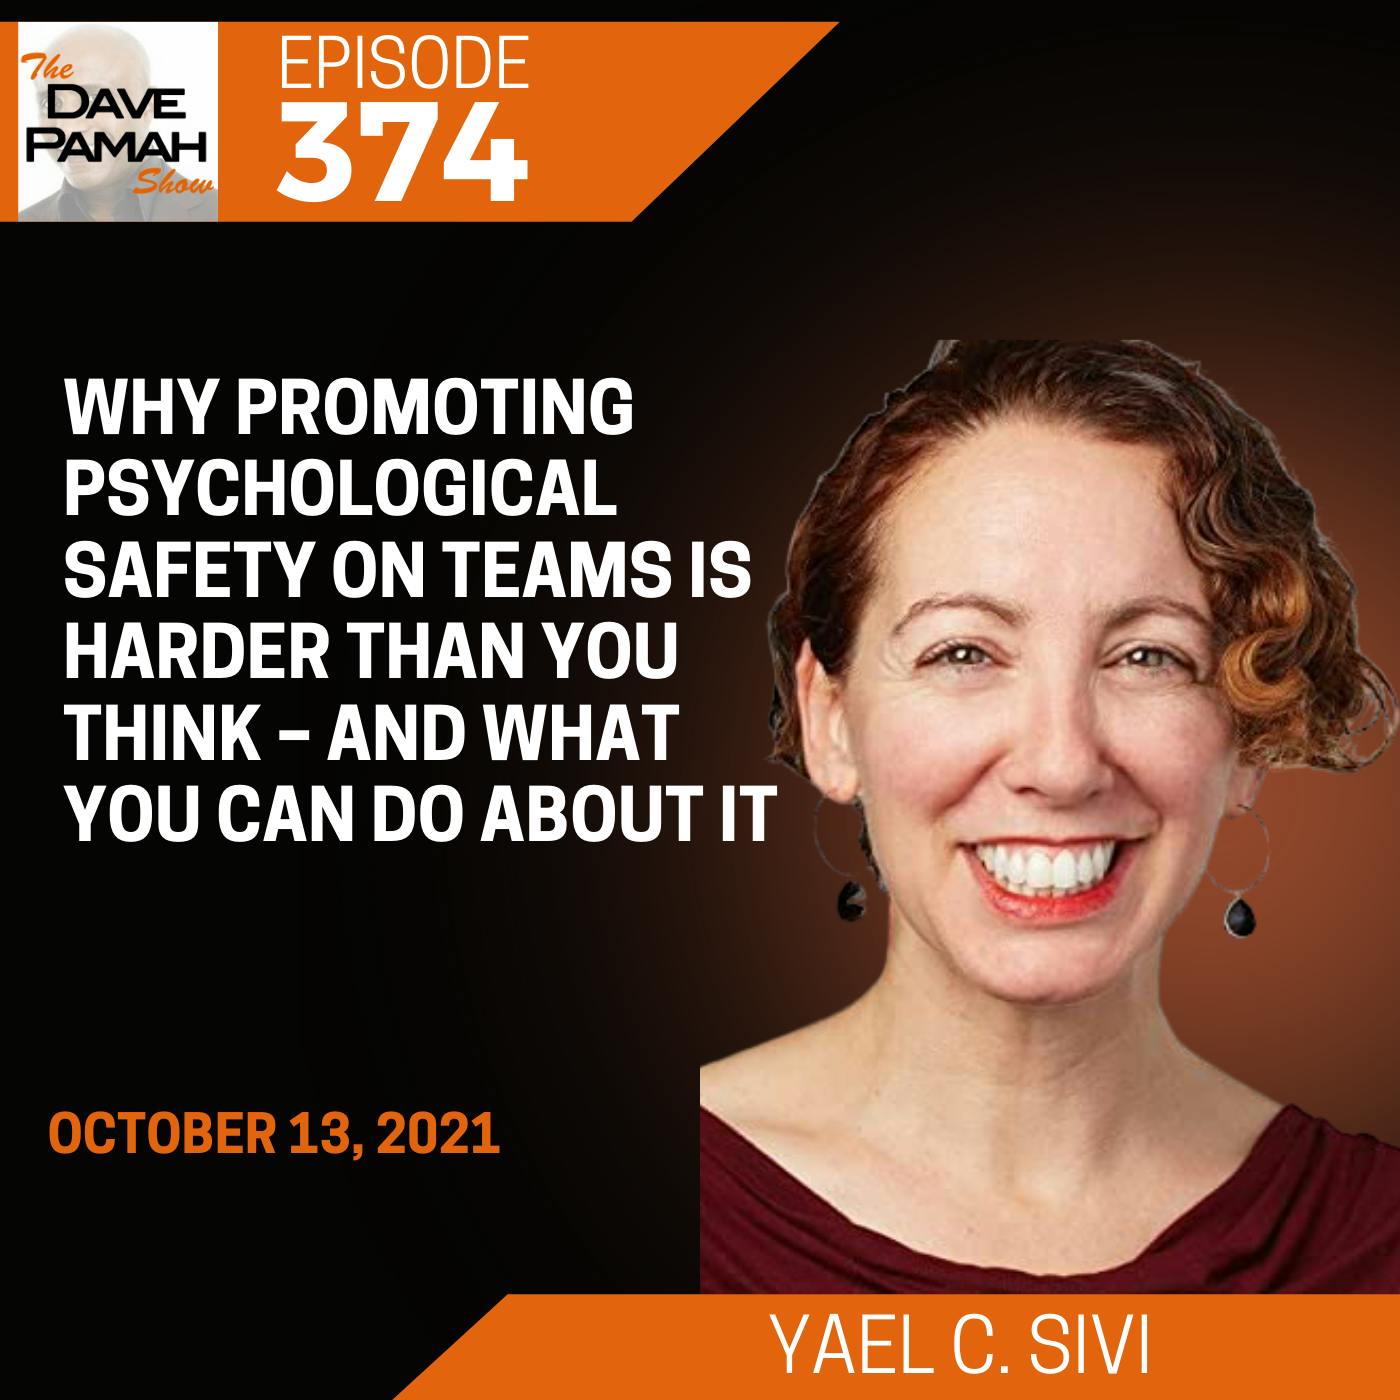 Why Promoting Psychological Safety on Teams Is Harder Than You Think – And What You Can Do About It with Yael C. Sivi Image